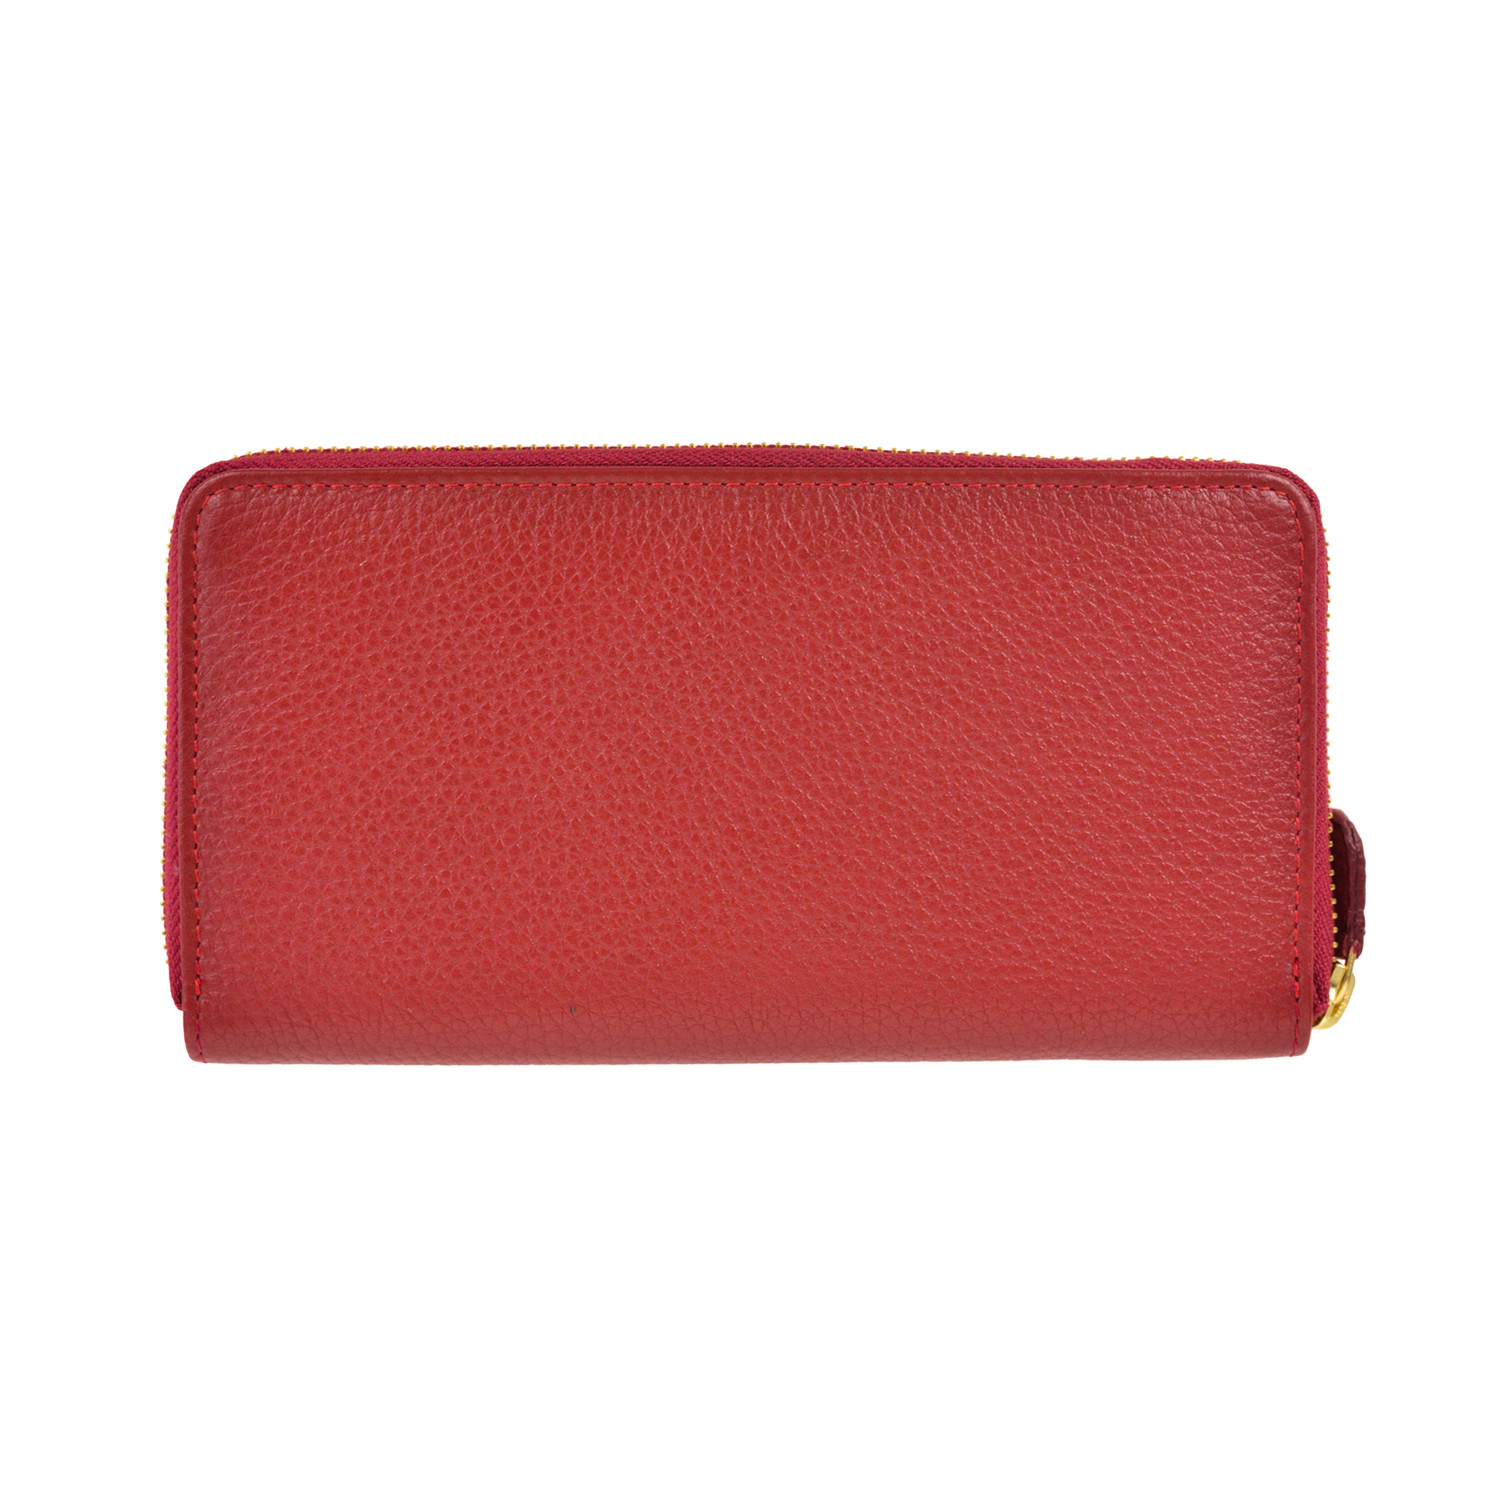 Roberto Cavalli // Continental Leather Wallet // Burgundy - Clearance ...